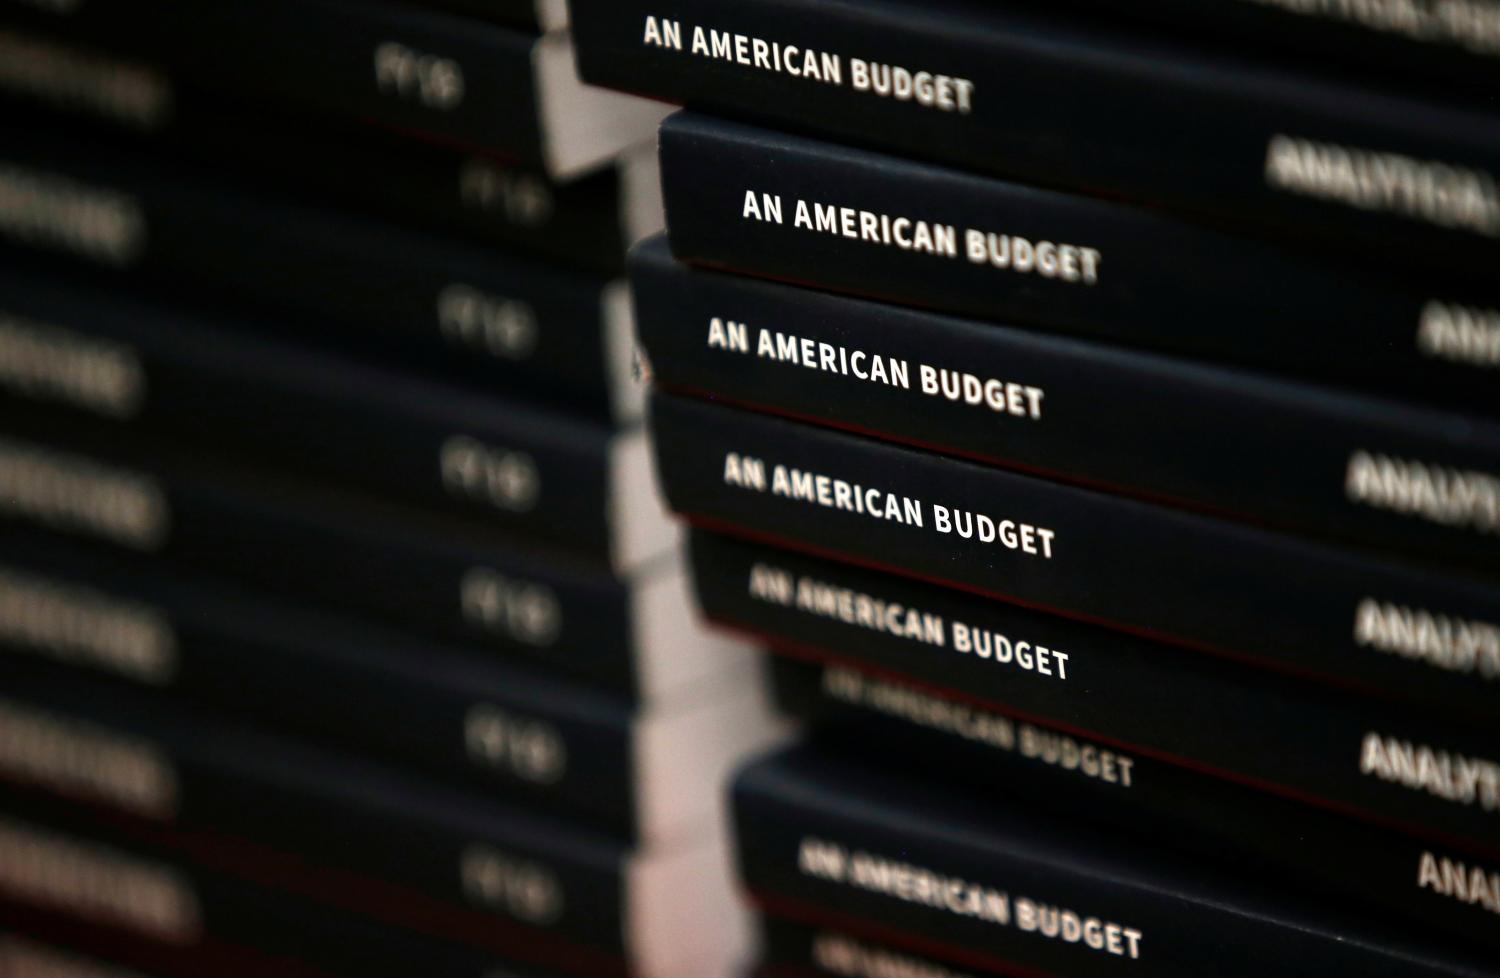 New copies of President Donald Trump's Budget for the U.S. Government for the Fiscal Year 2019 lay on a display table at the U.S. Government Publishing Office in Washington, U.S., February 12, 2018. REUTERS/Leah Millis - RC1EF3683E50